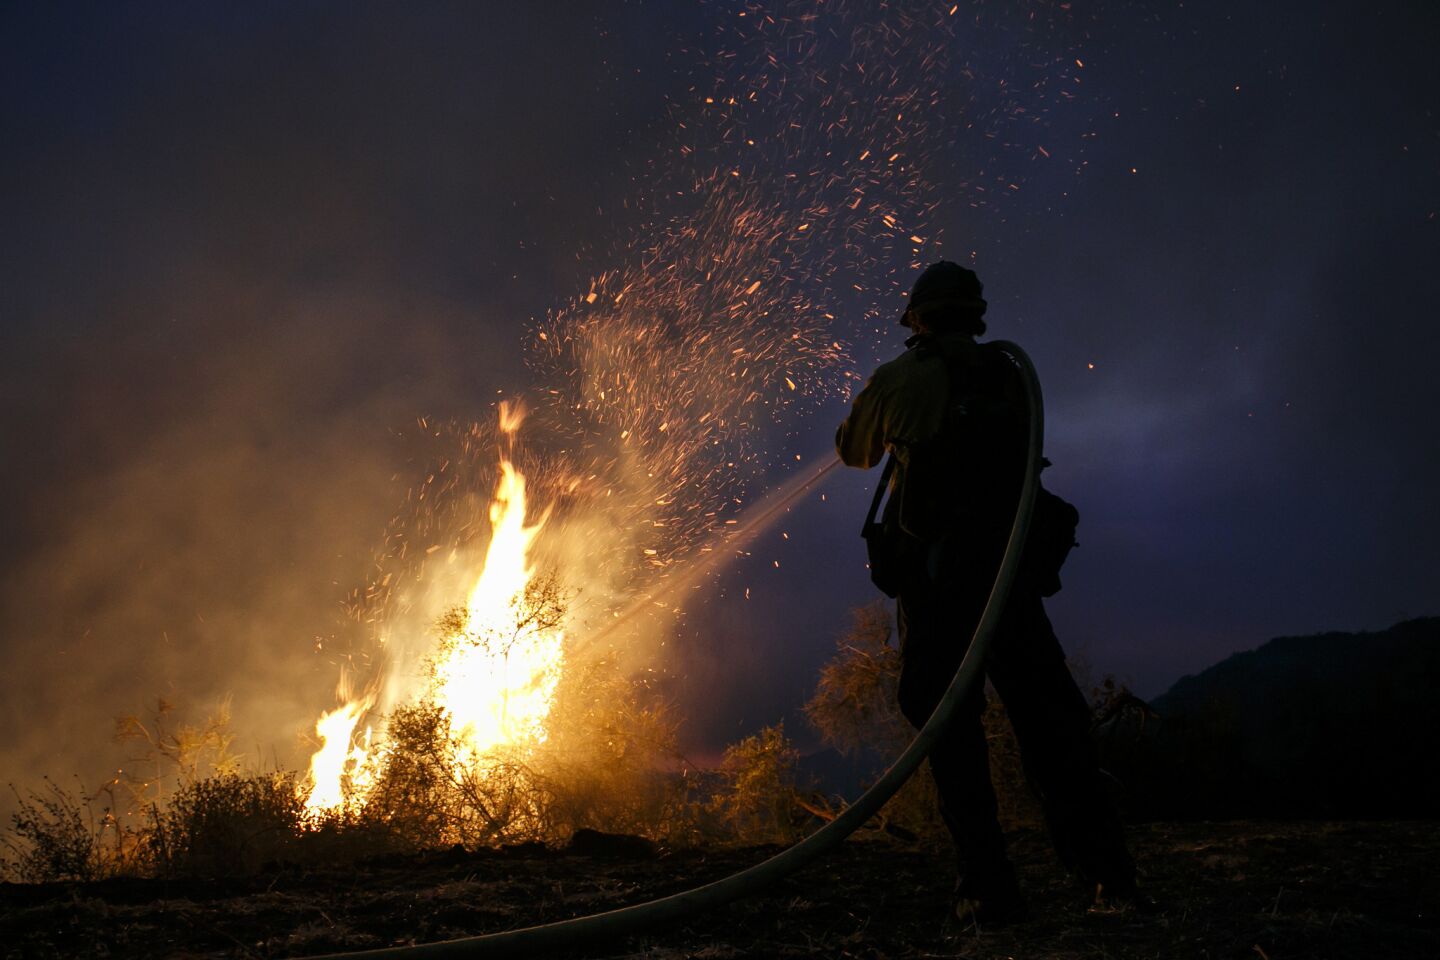 A firefighter tries to control a growing flame in El Capitan Canyon.